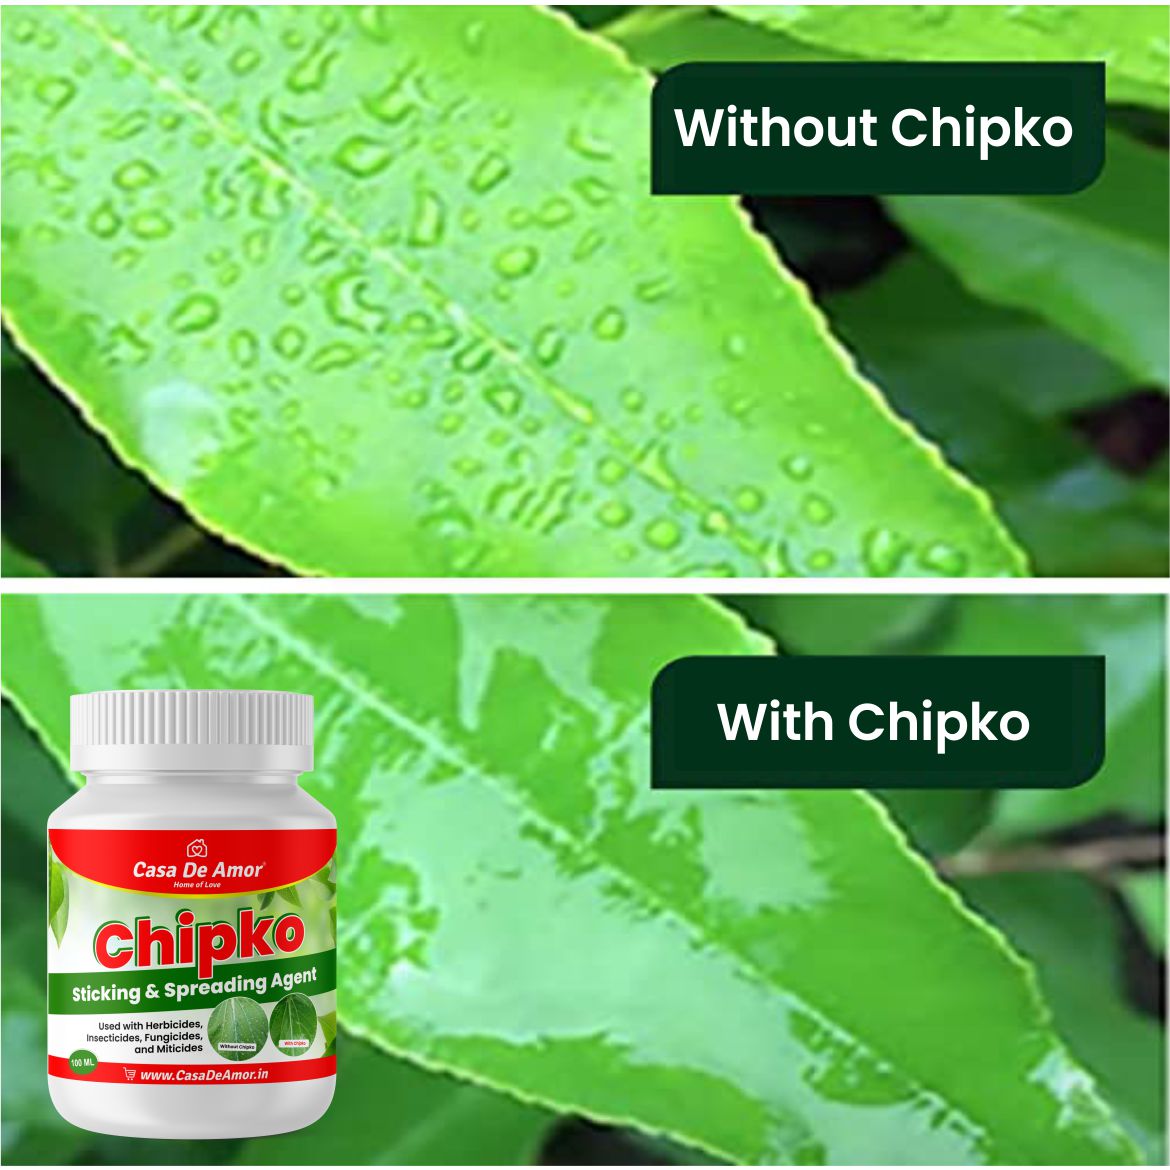 Casa De Amor Chipko Sticking & Spreading Agent (Used with Herbicides, Insecticides, Fungicides & Miticides)